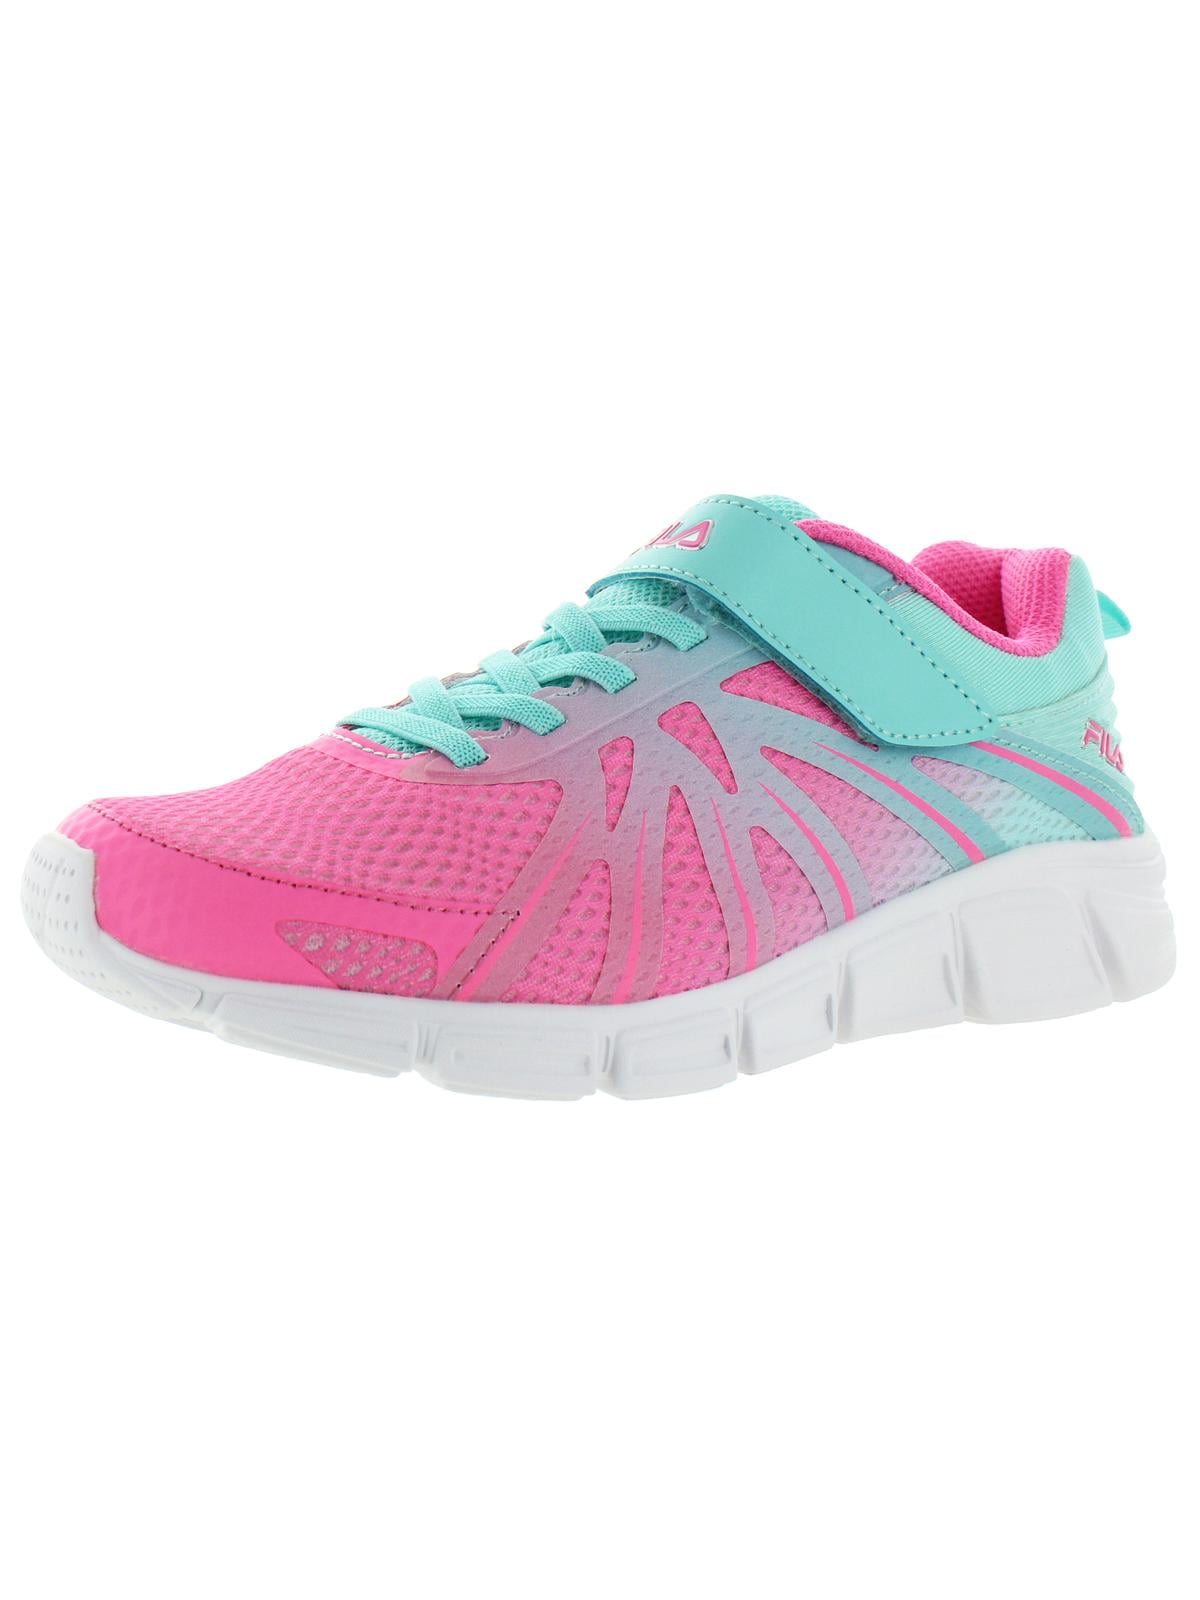 Fila Girls Fraction Strap Trainers 